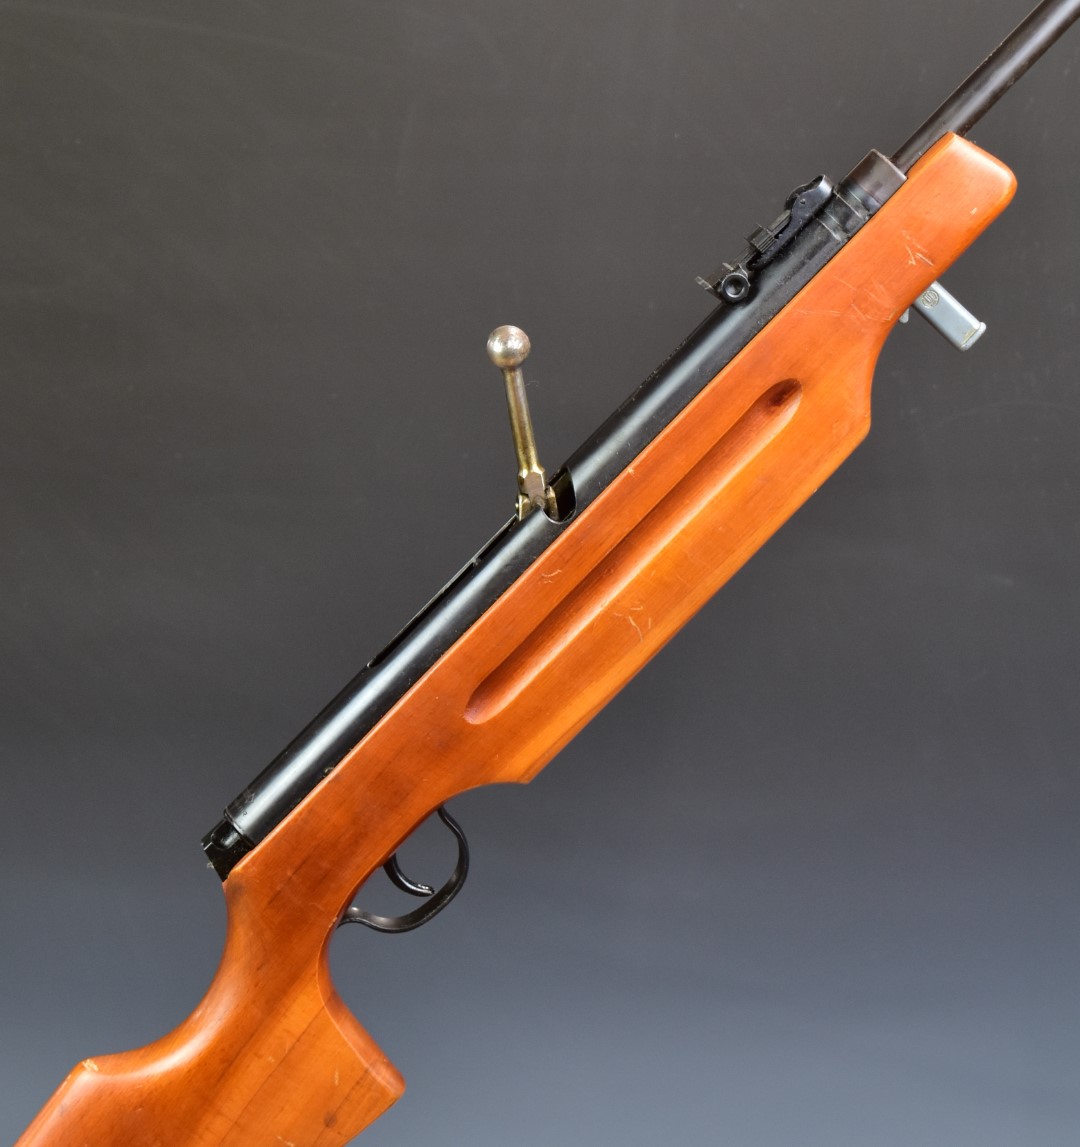 Haenel Model 310 lever-action 4.4mm calibre air rifle with semi-pistol grip, adjustable sights and